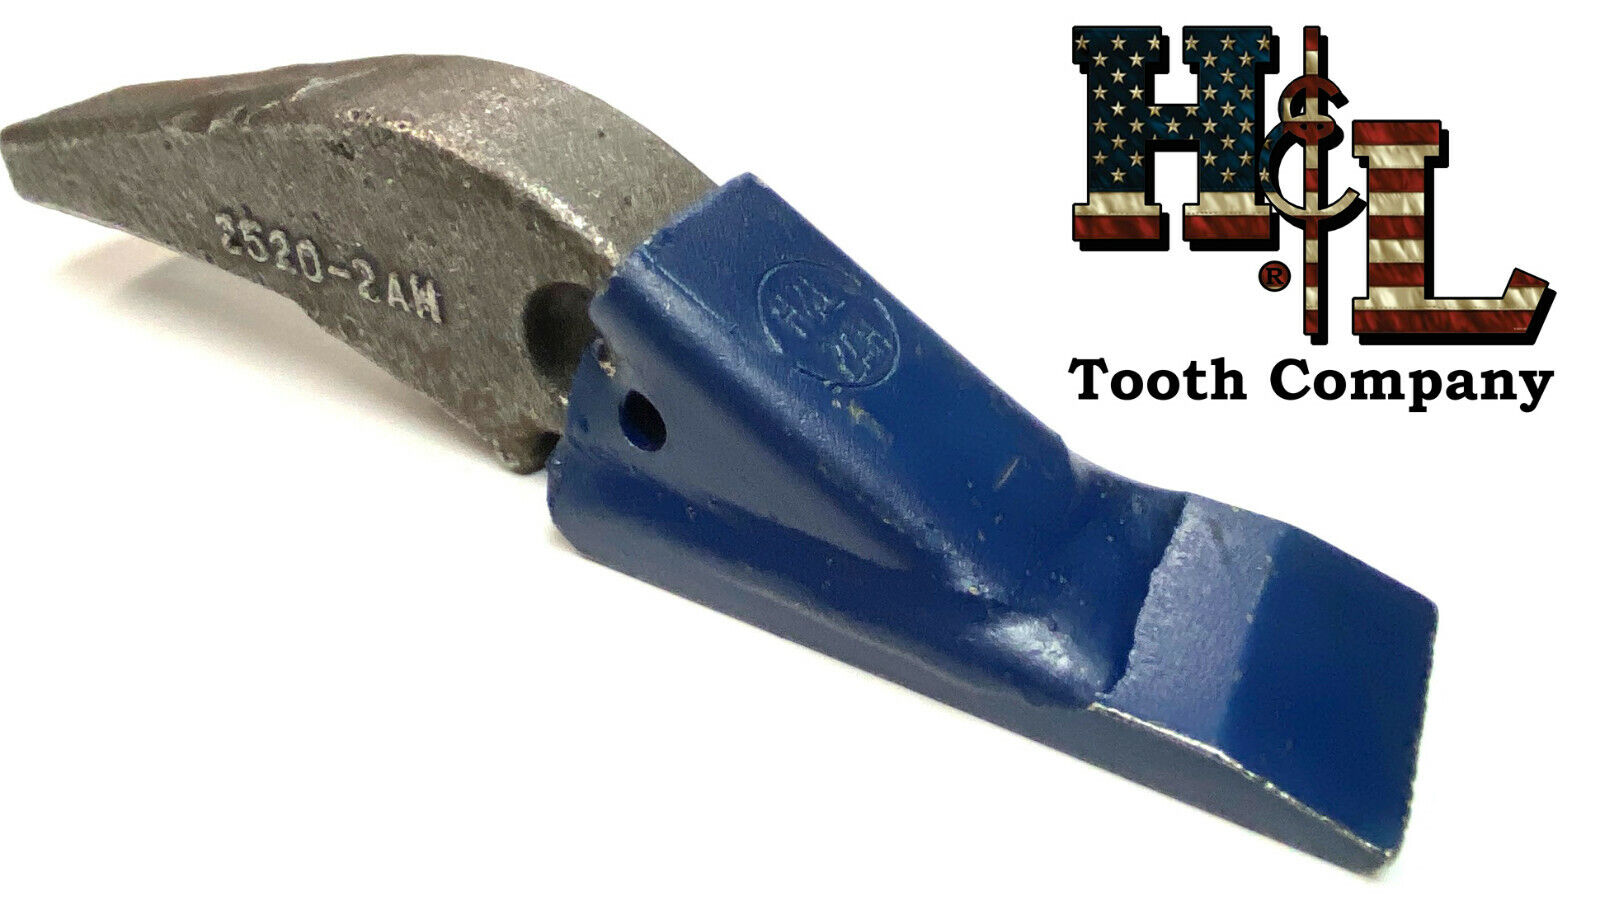 L 2520-2AH HL Tooth Original Weld On Adapter 2A Teeth Crimped A